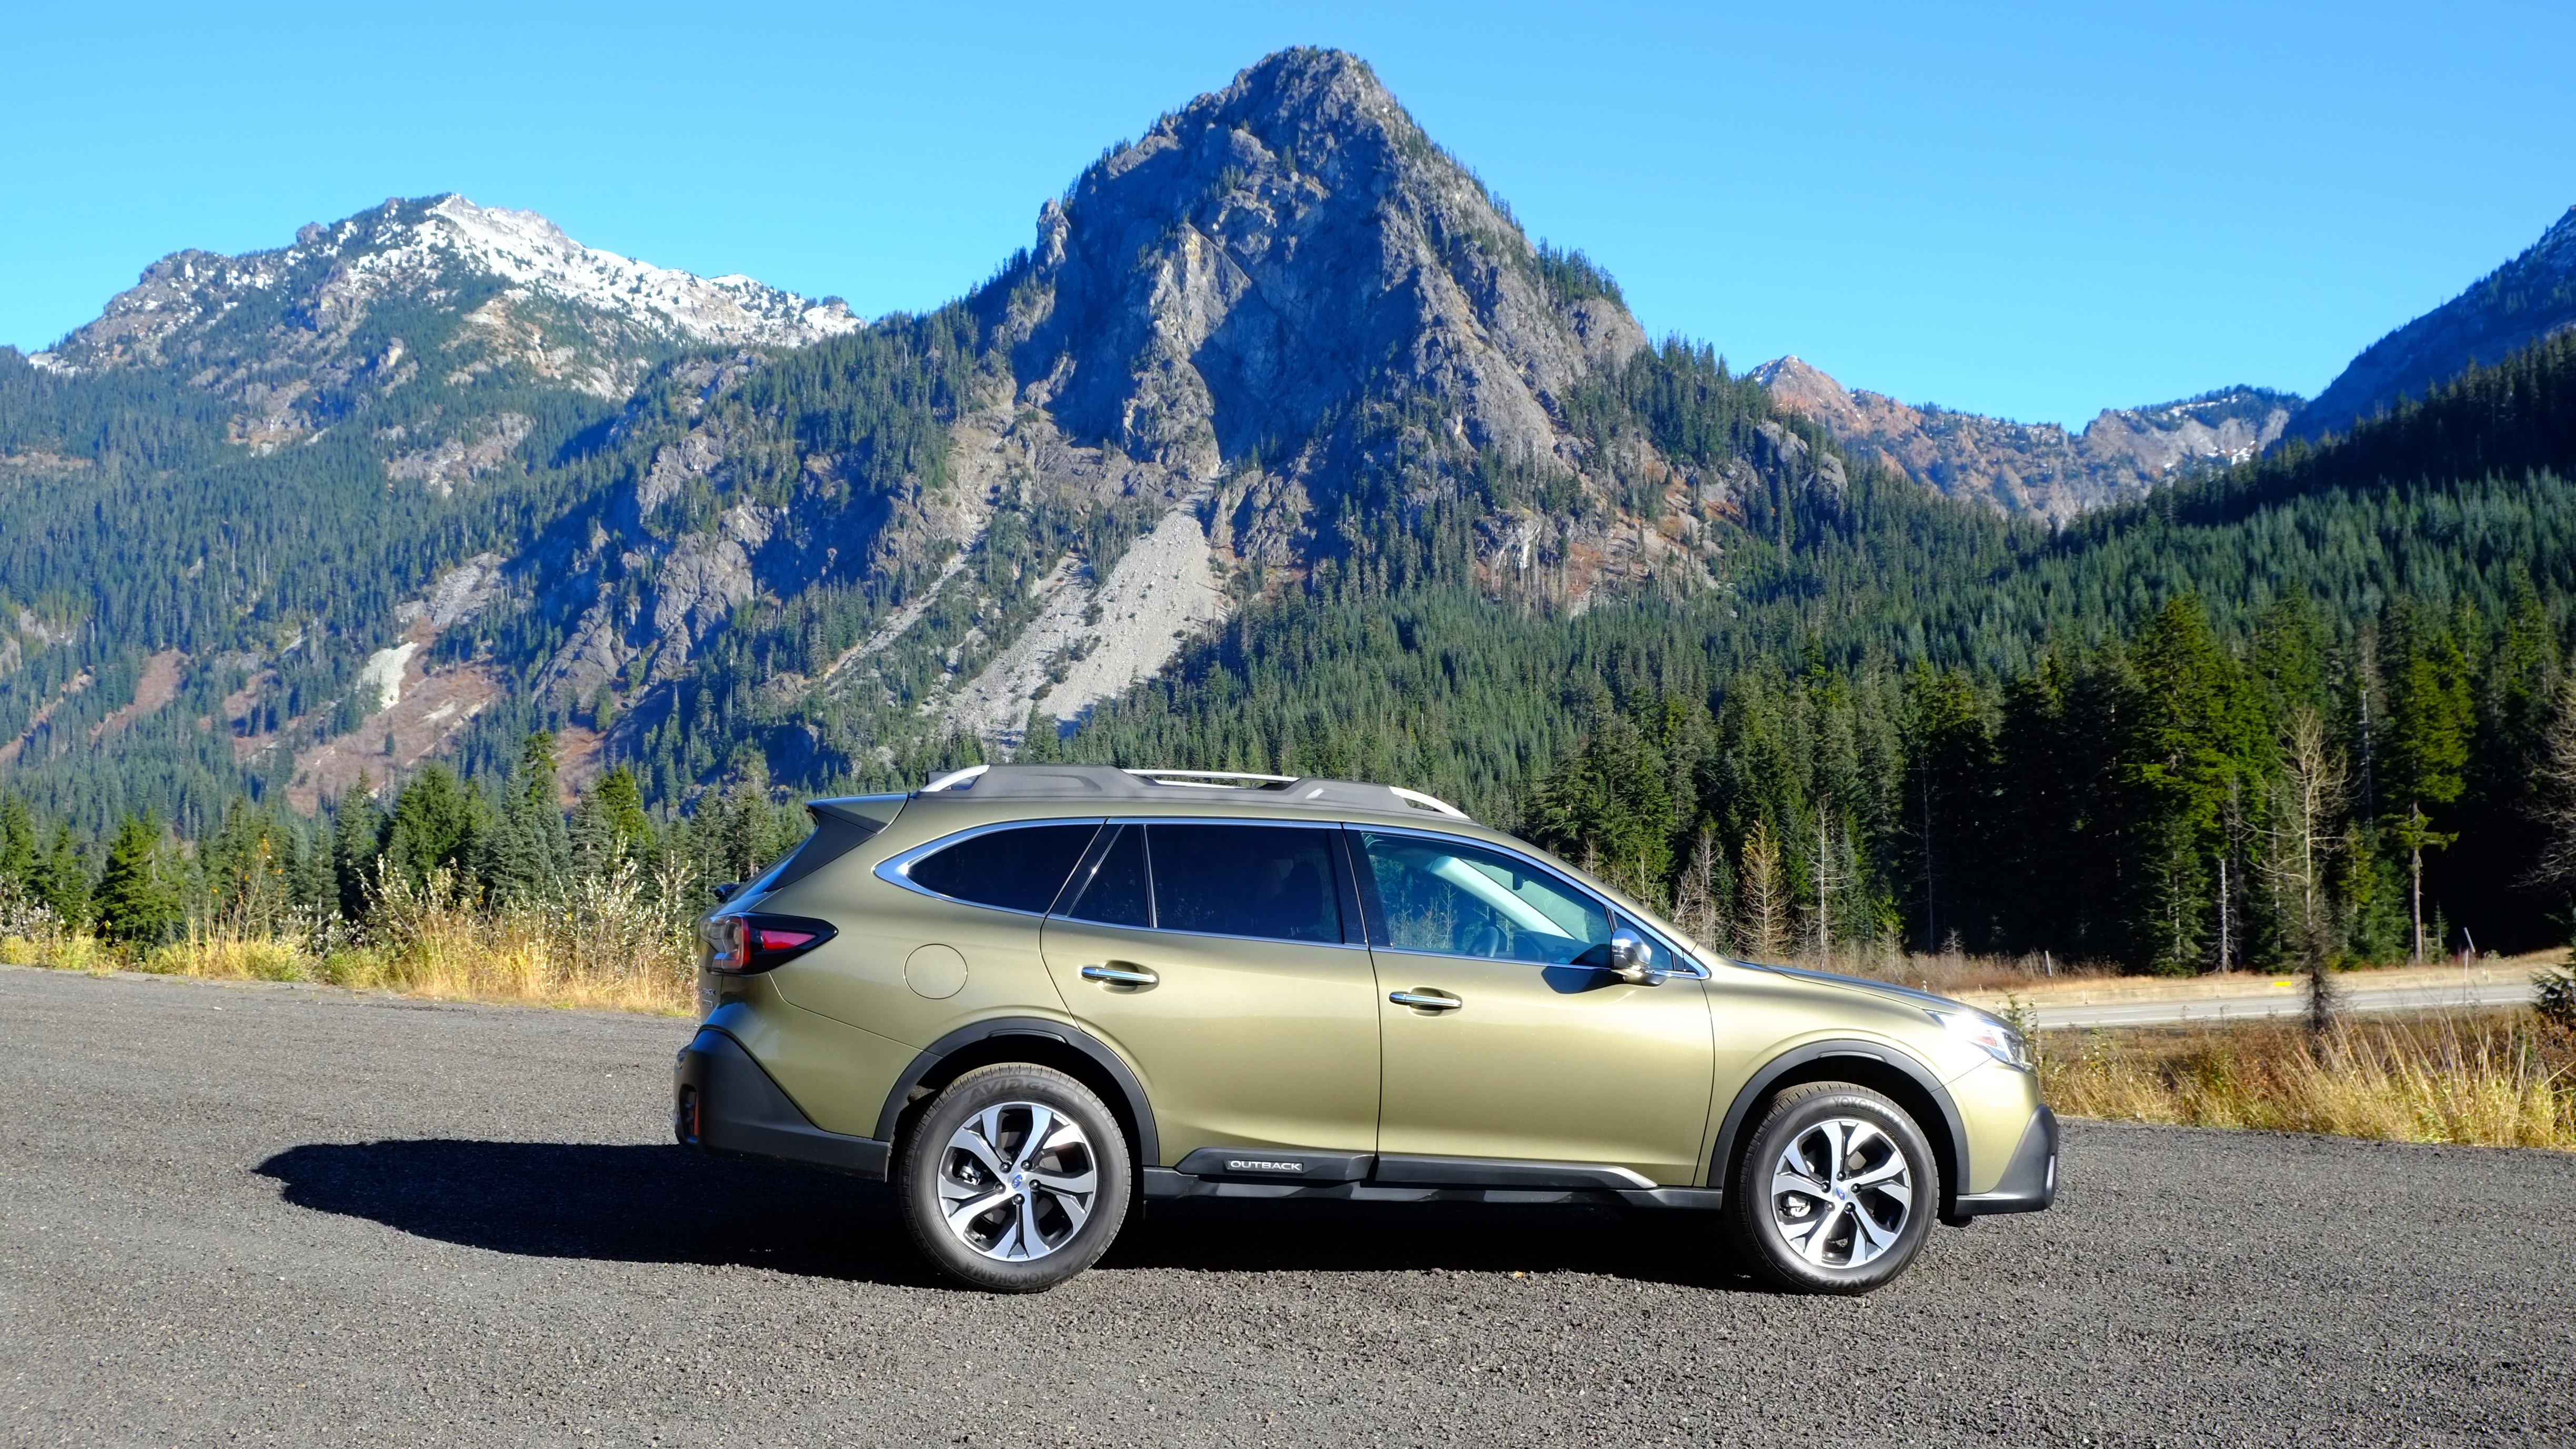 2020 subaru outback quick spin with the base 2 5 liter engine autoblog 2020 subaru outback quick spin with the